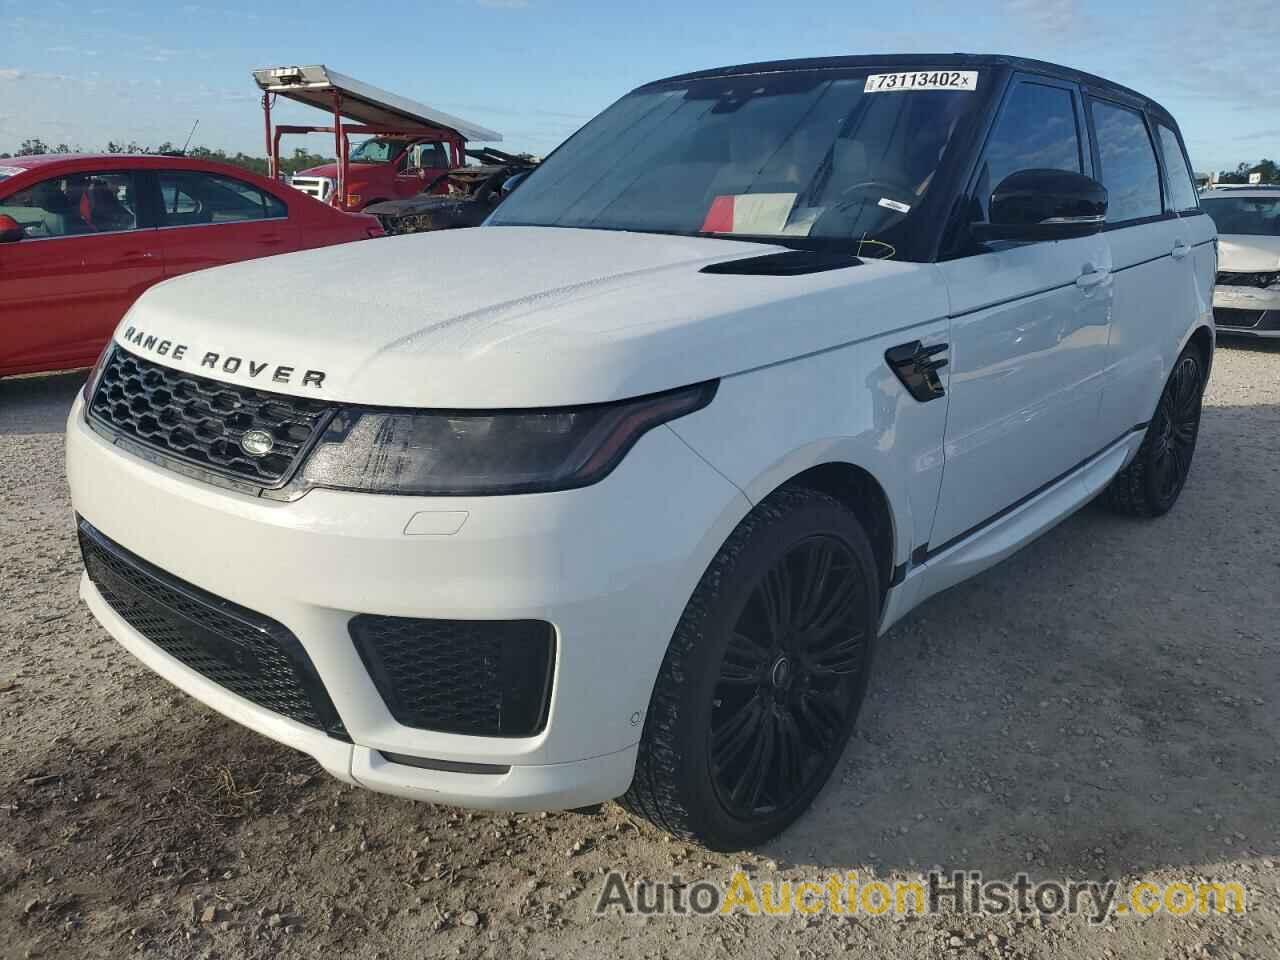 2019 LAND ROVER RANGEROVER SUPERCHARGED DYNAMIC, SALWR2RE6KA869489